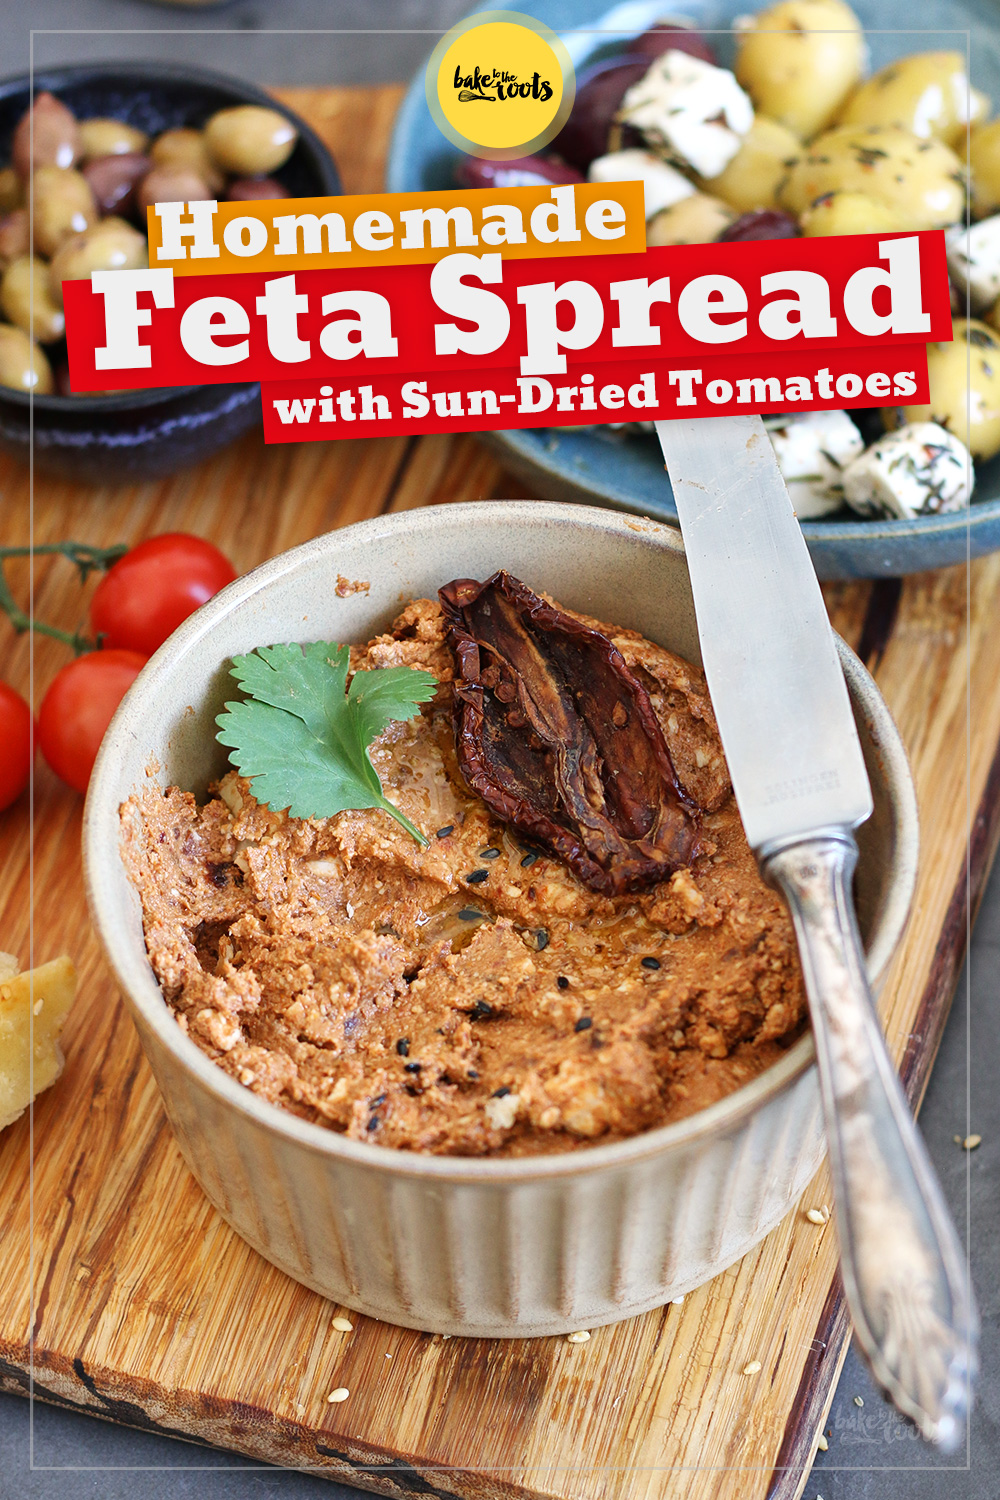 Homemade Feta Spread with Sun-Dried Tomatoes | Bake to the roots